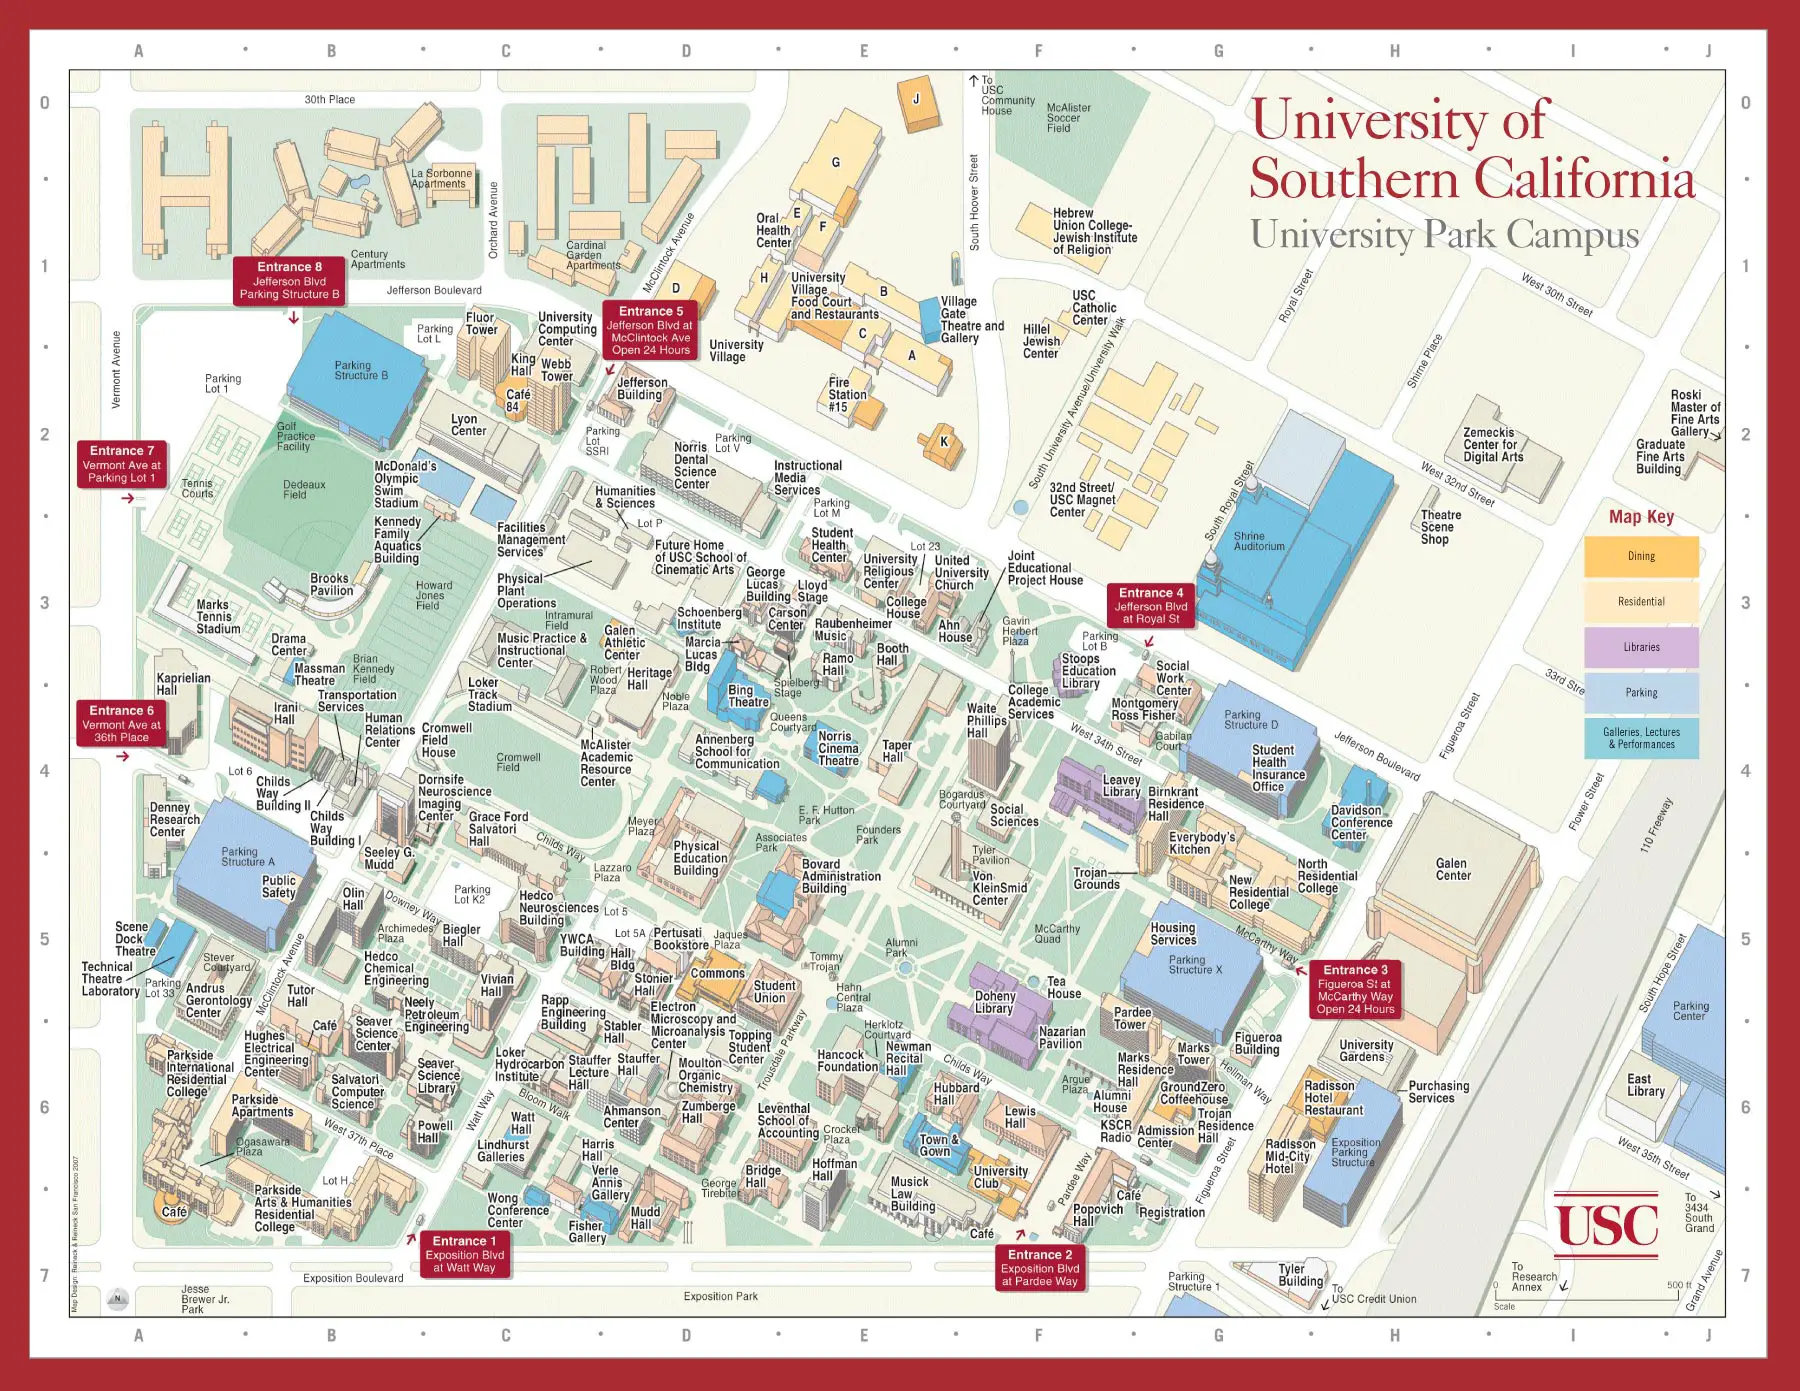 University of Southern California Campus Map